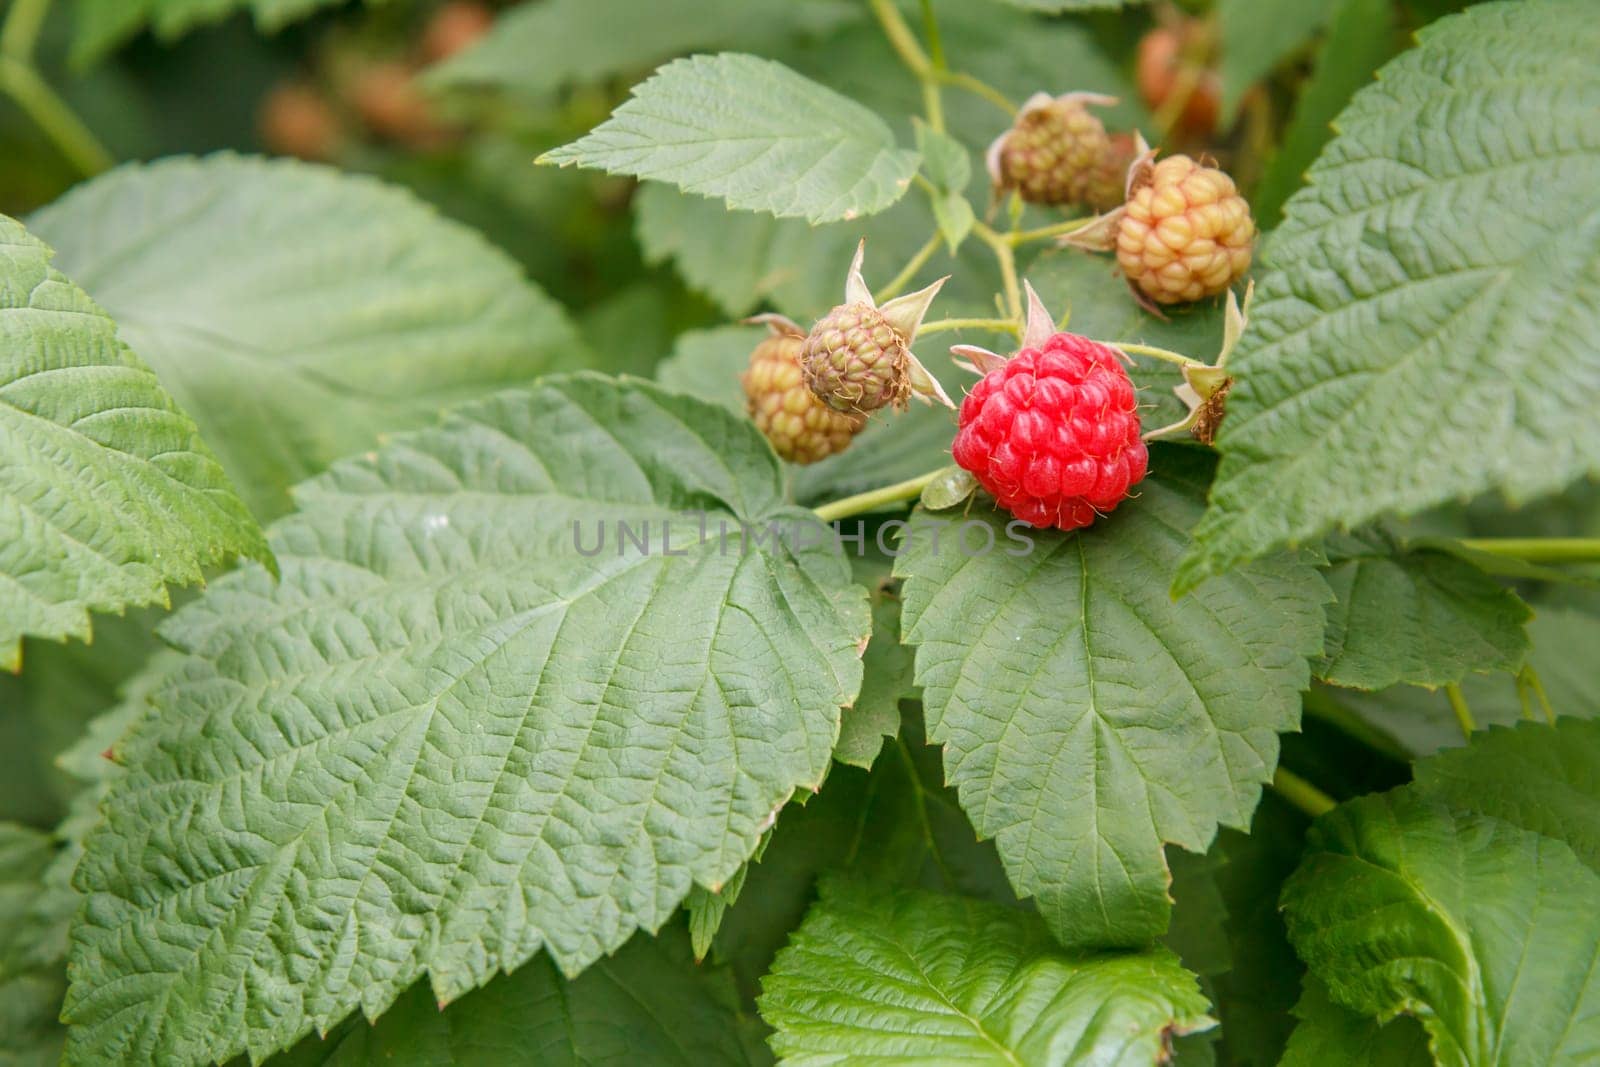 Close-up view of the ripe and unripe raspberries in the fruit garden with green leaves on the background. Shallow depth of field.